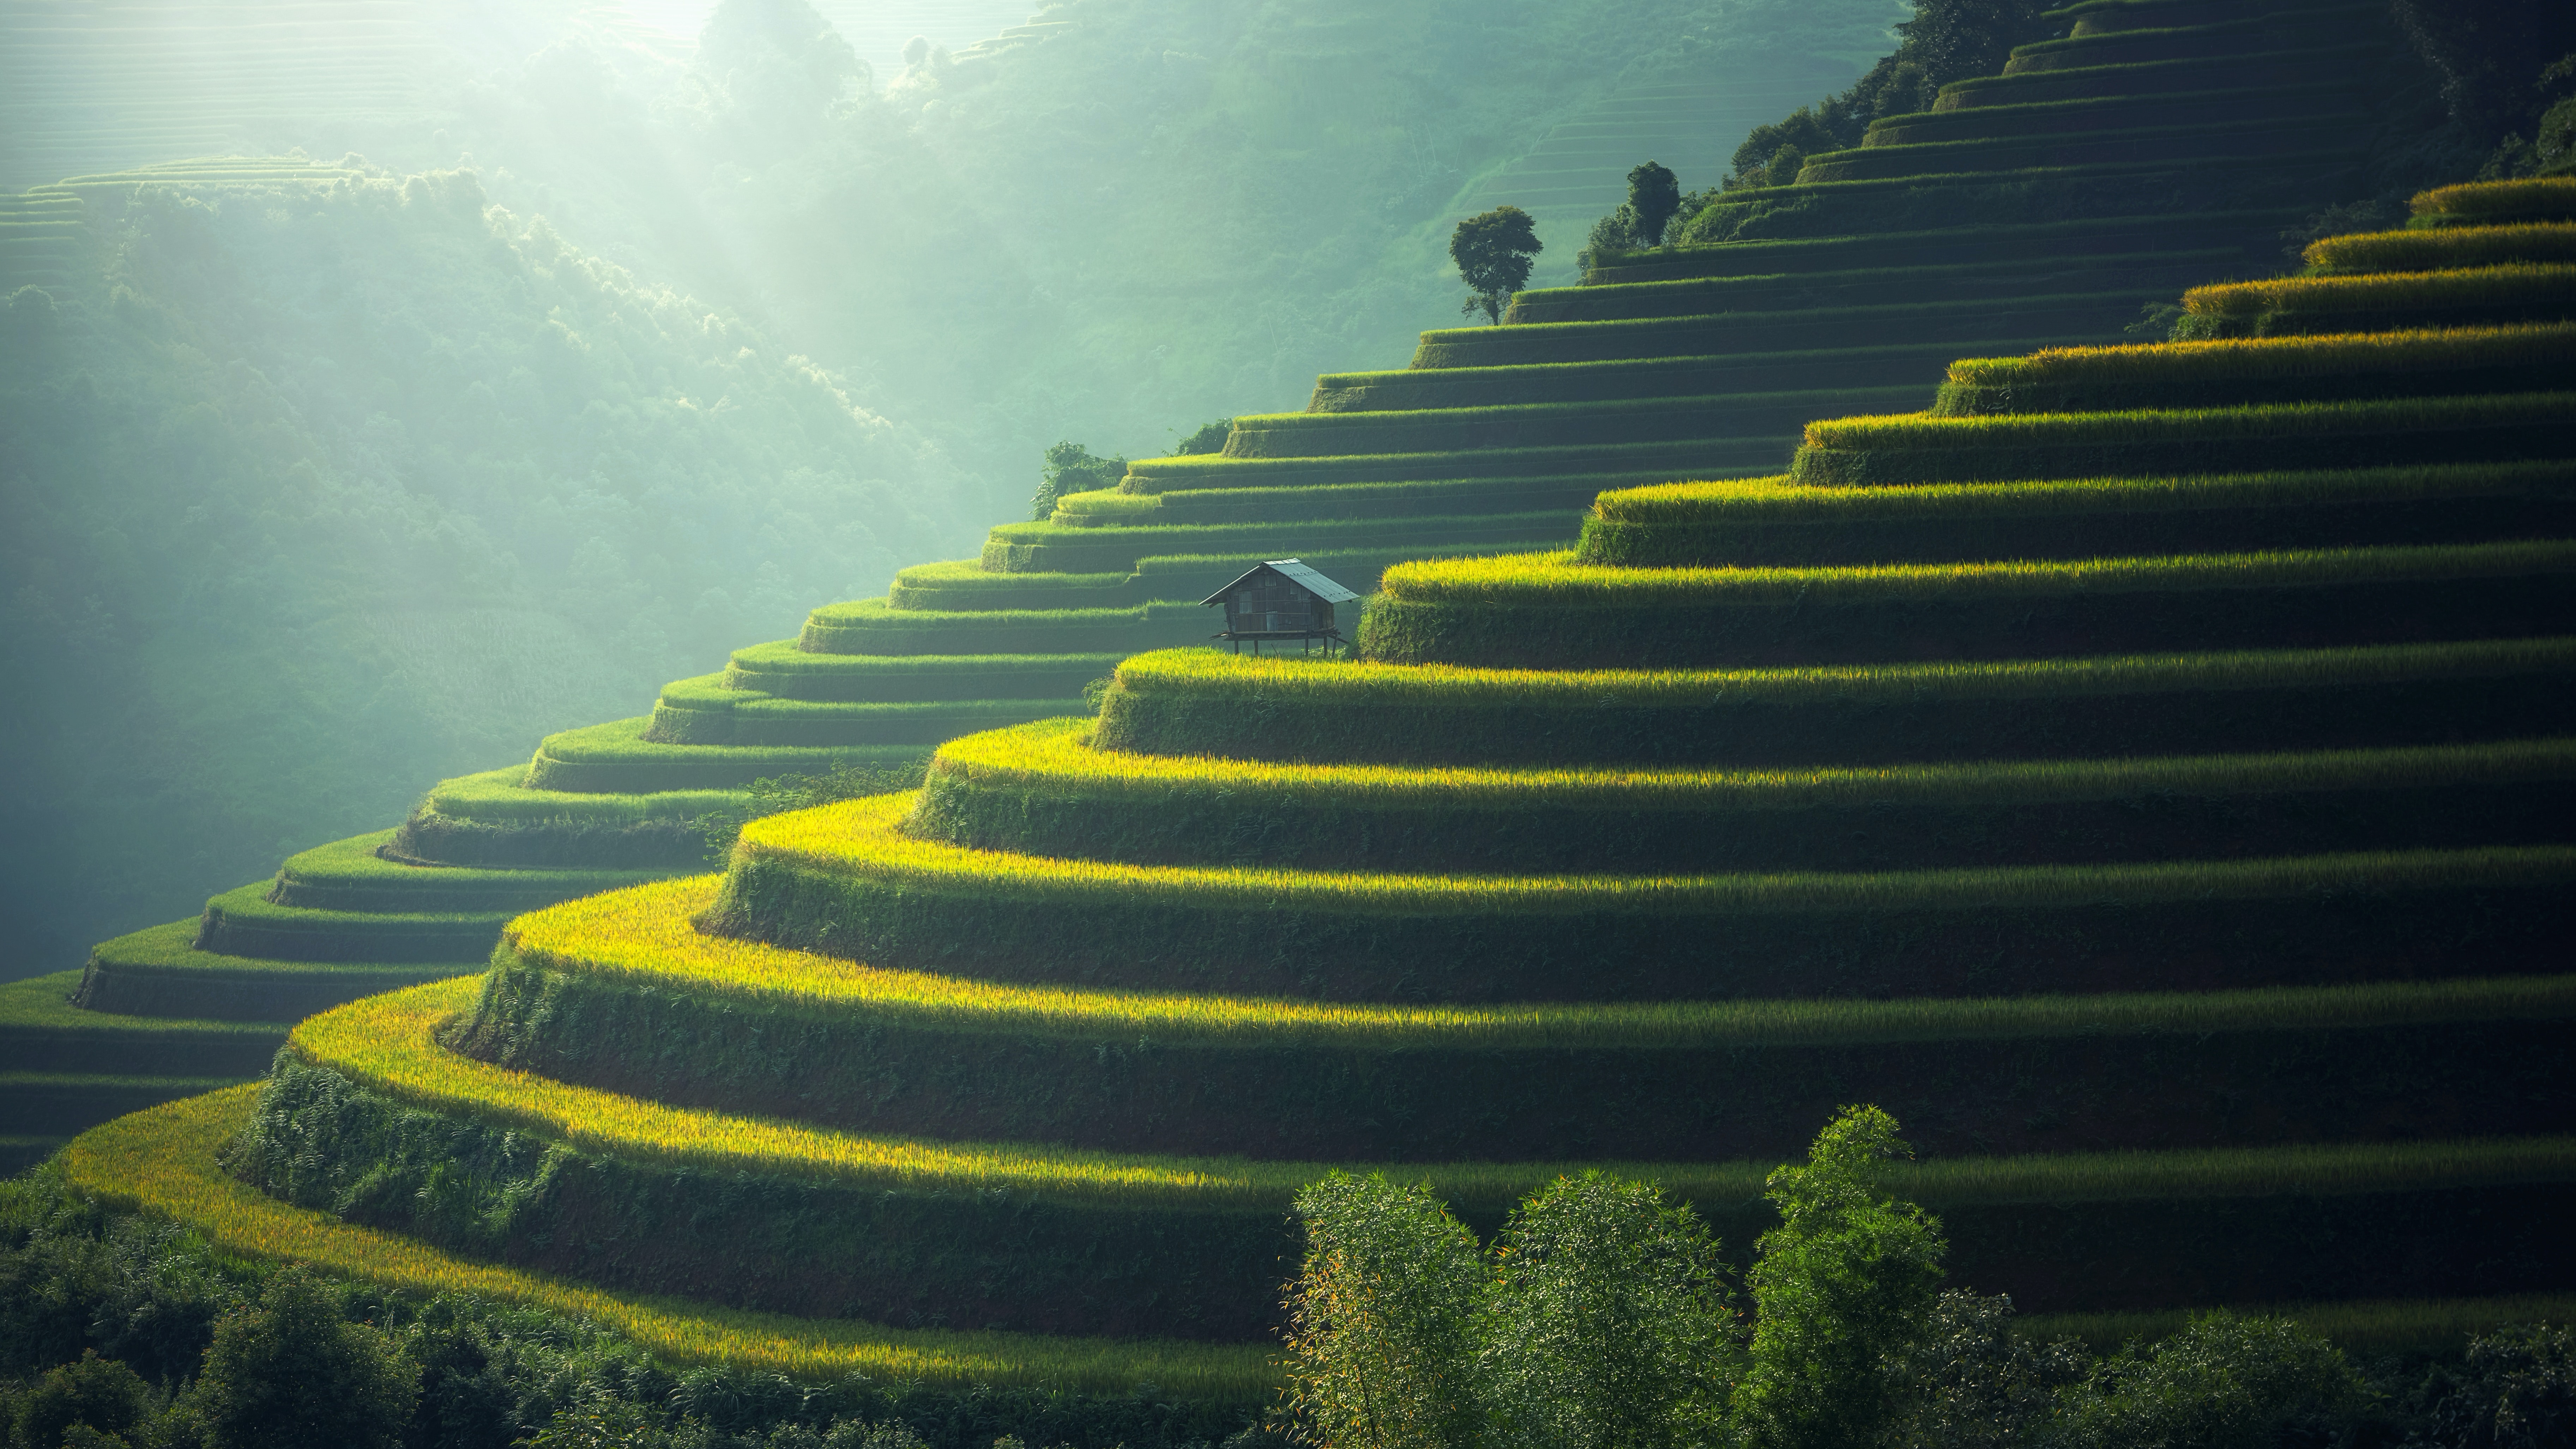 Stepped Rice Paddy Farms on Hillsides